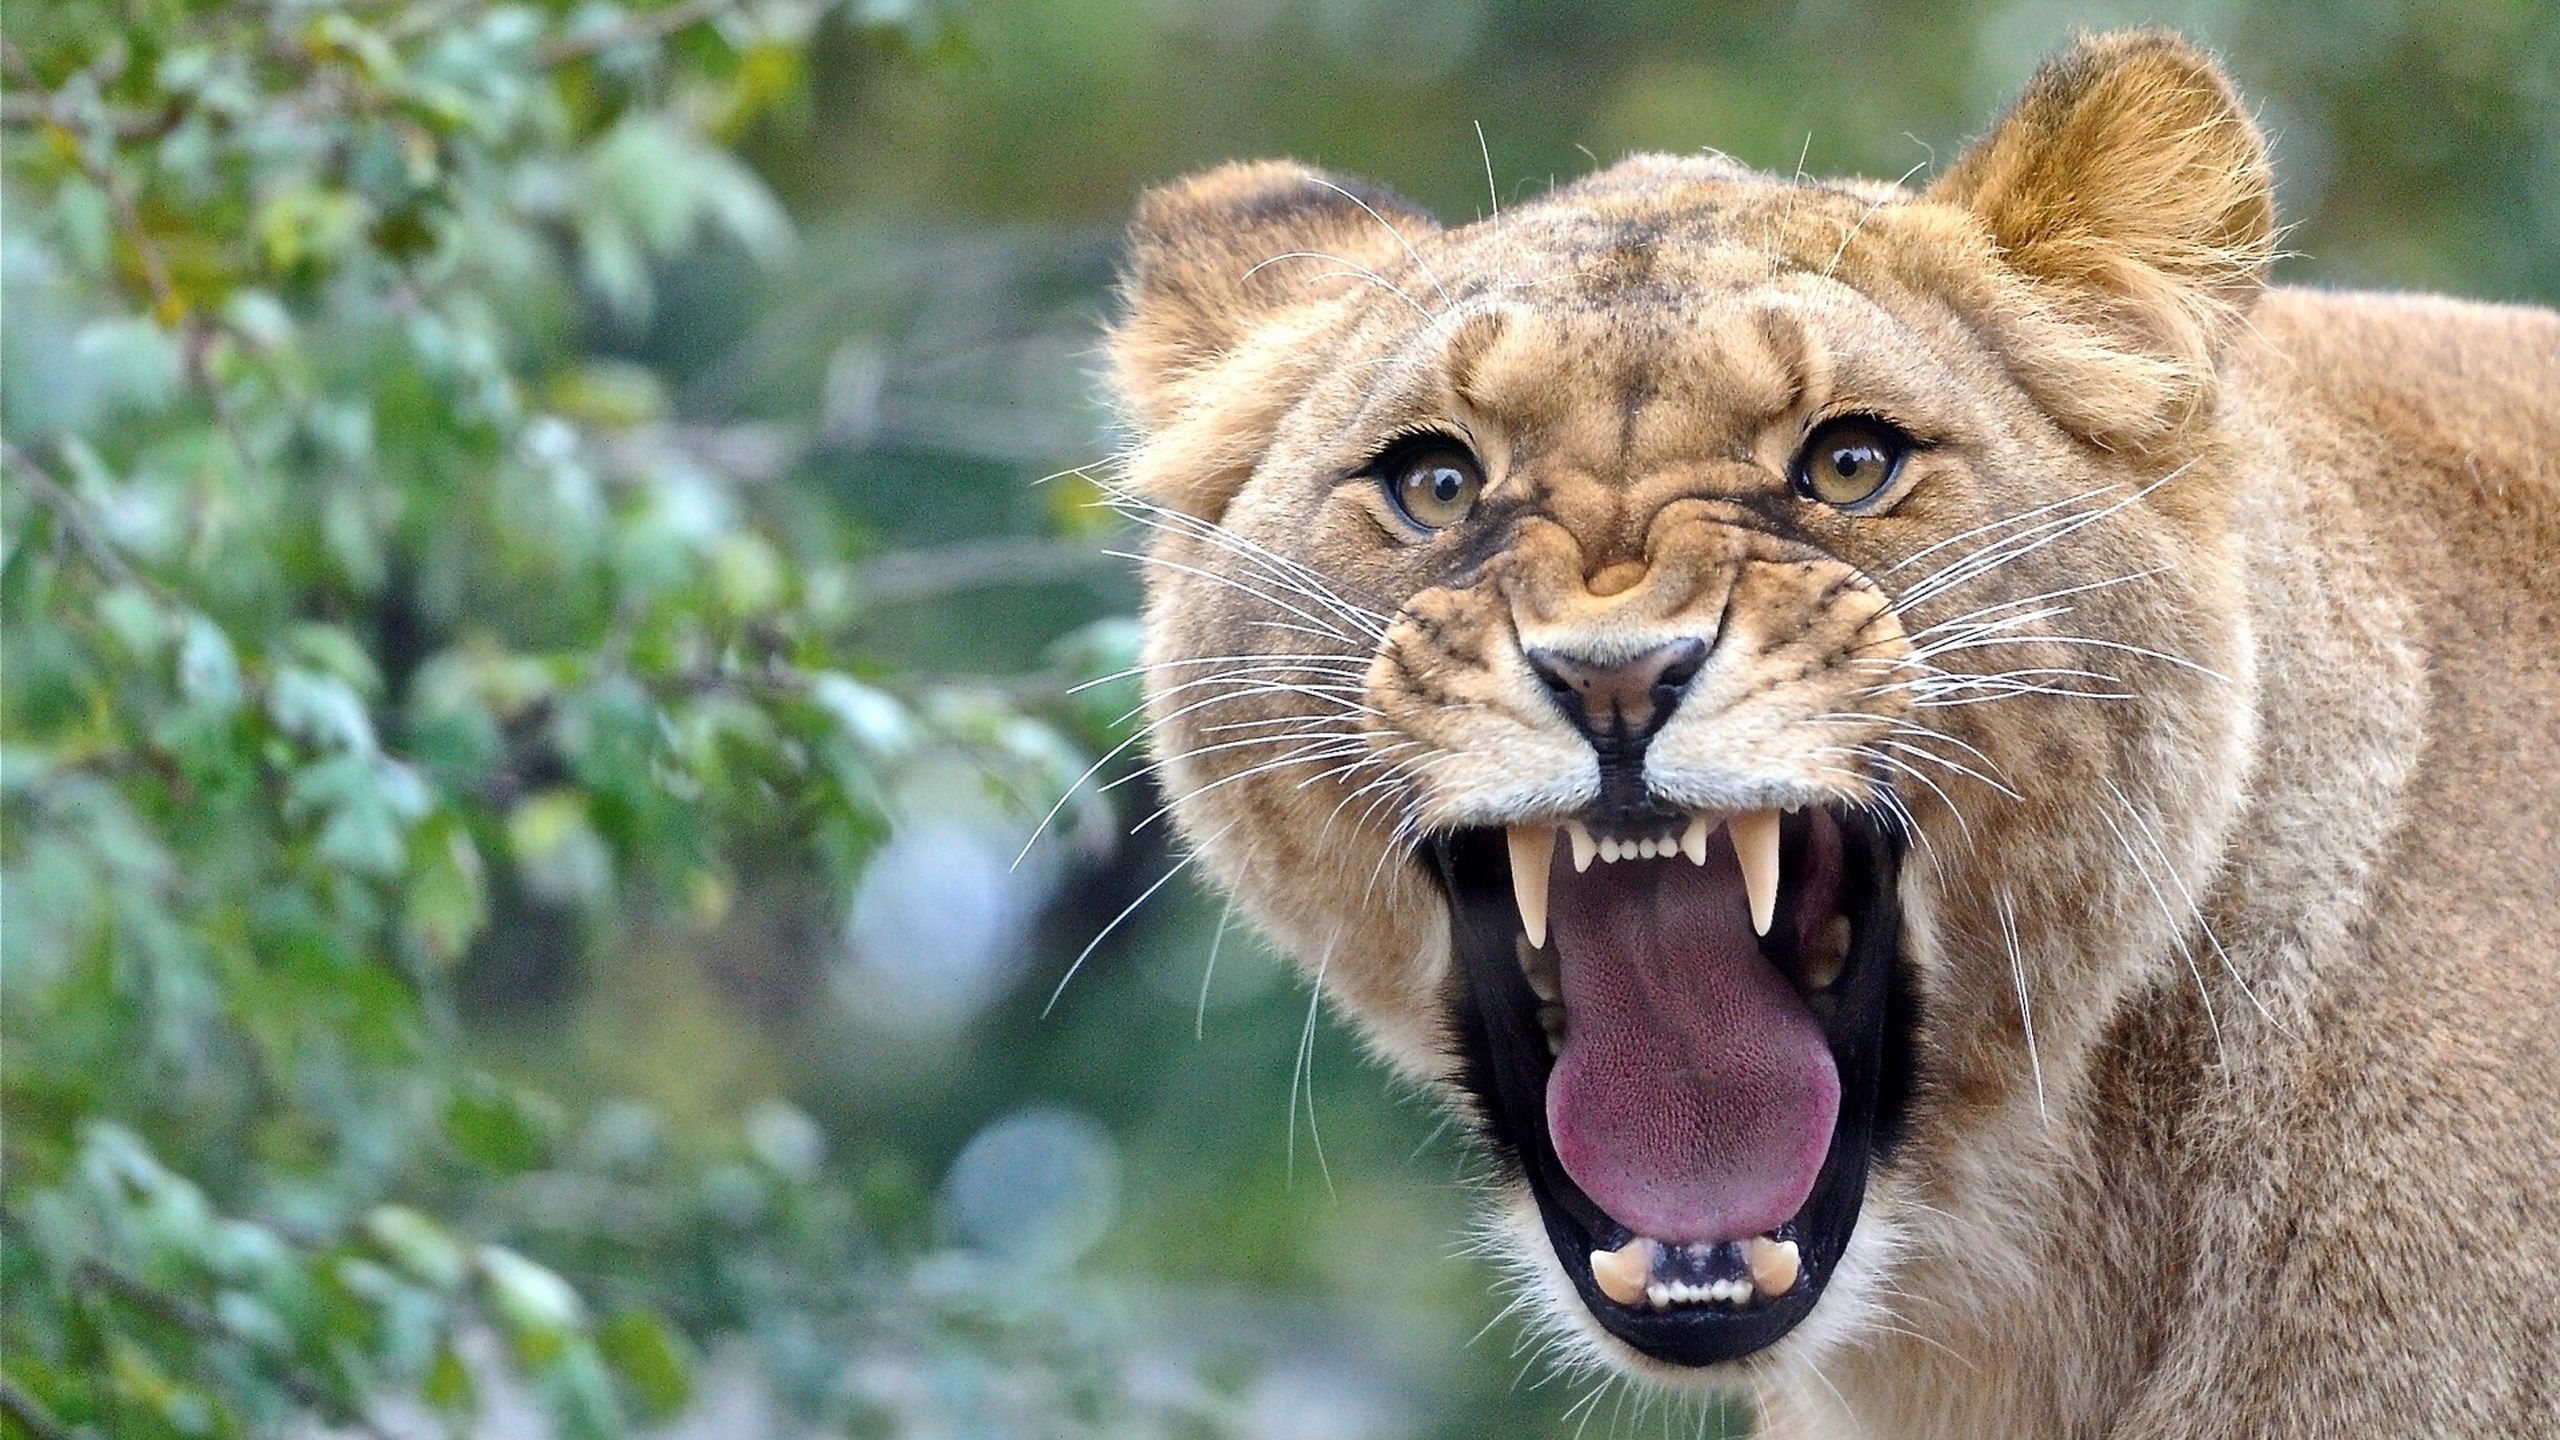 photo of lioness roaring
